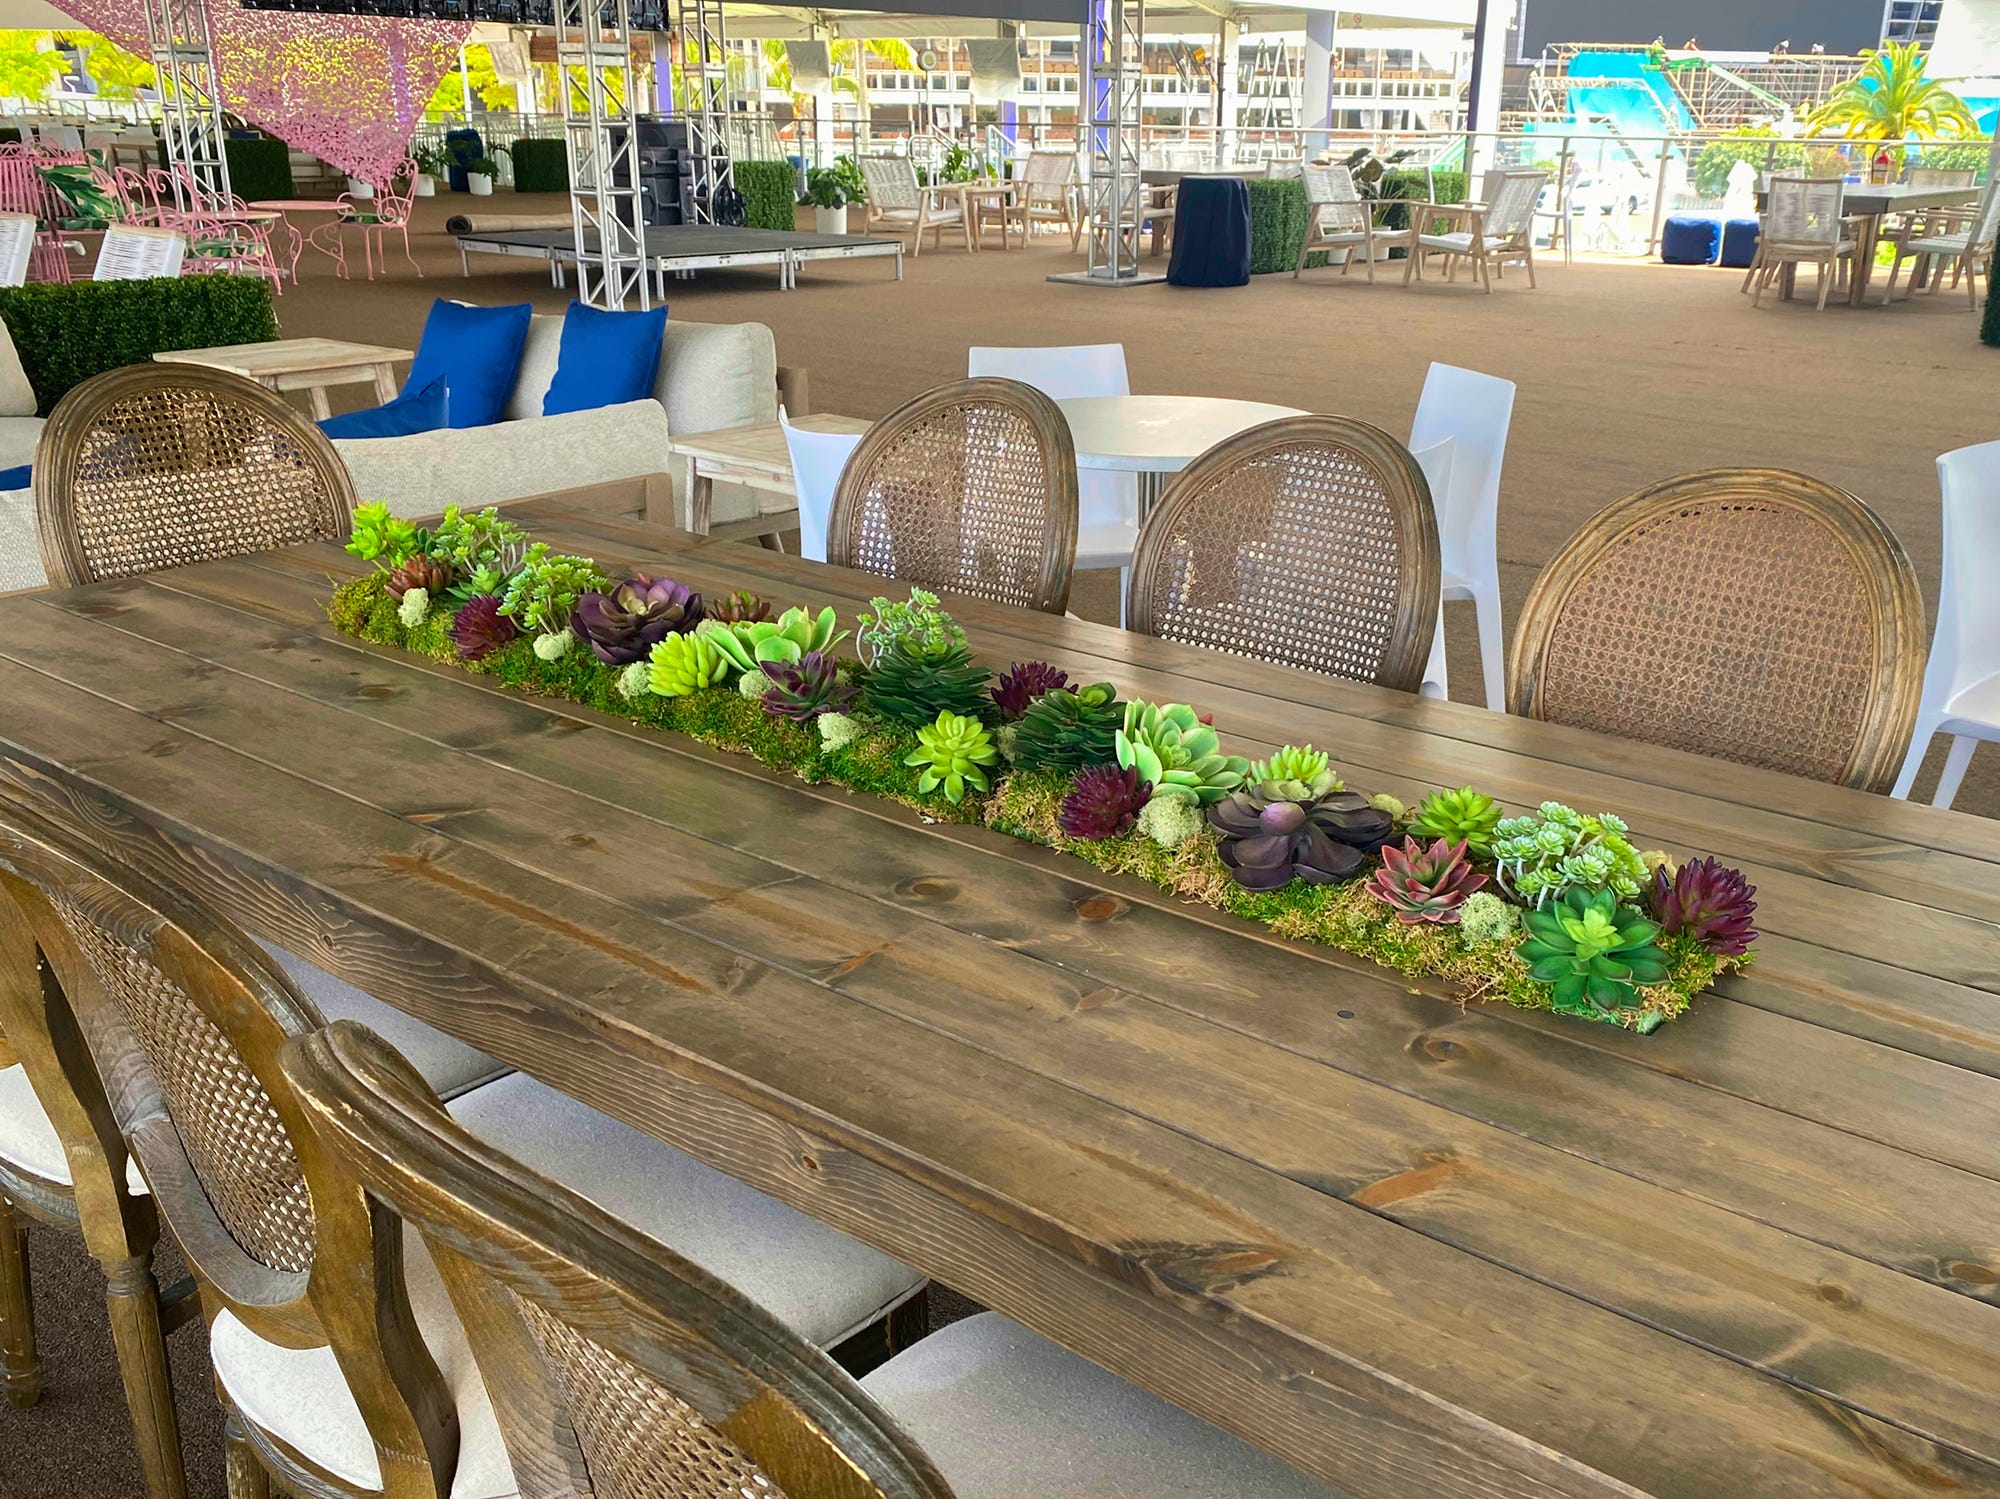 rented wood tables and cane back chairs with succulent centerpieces